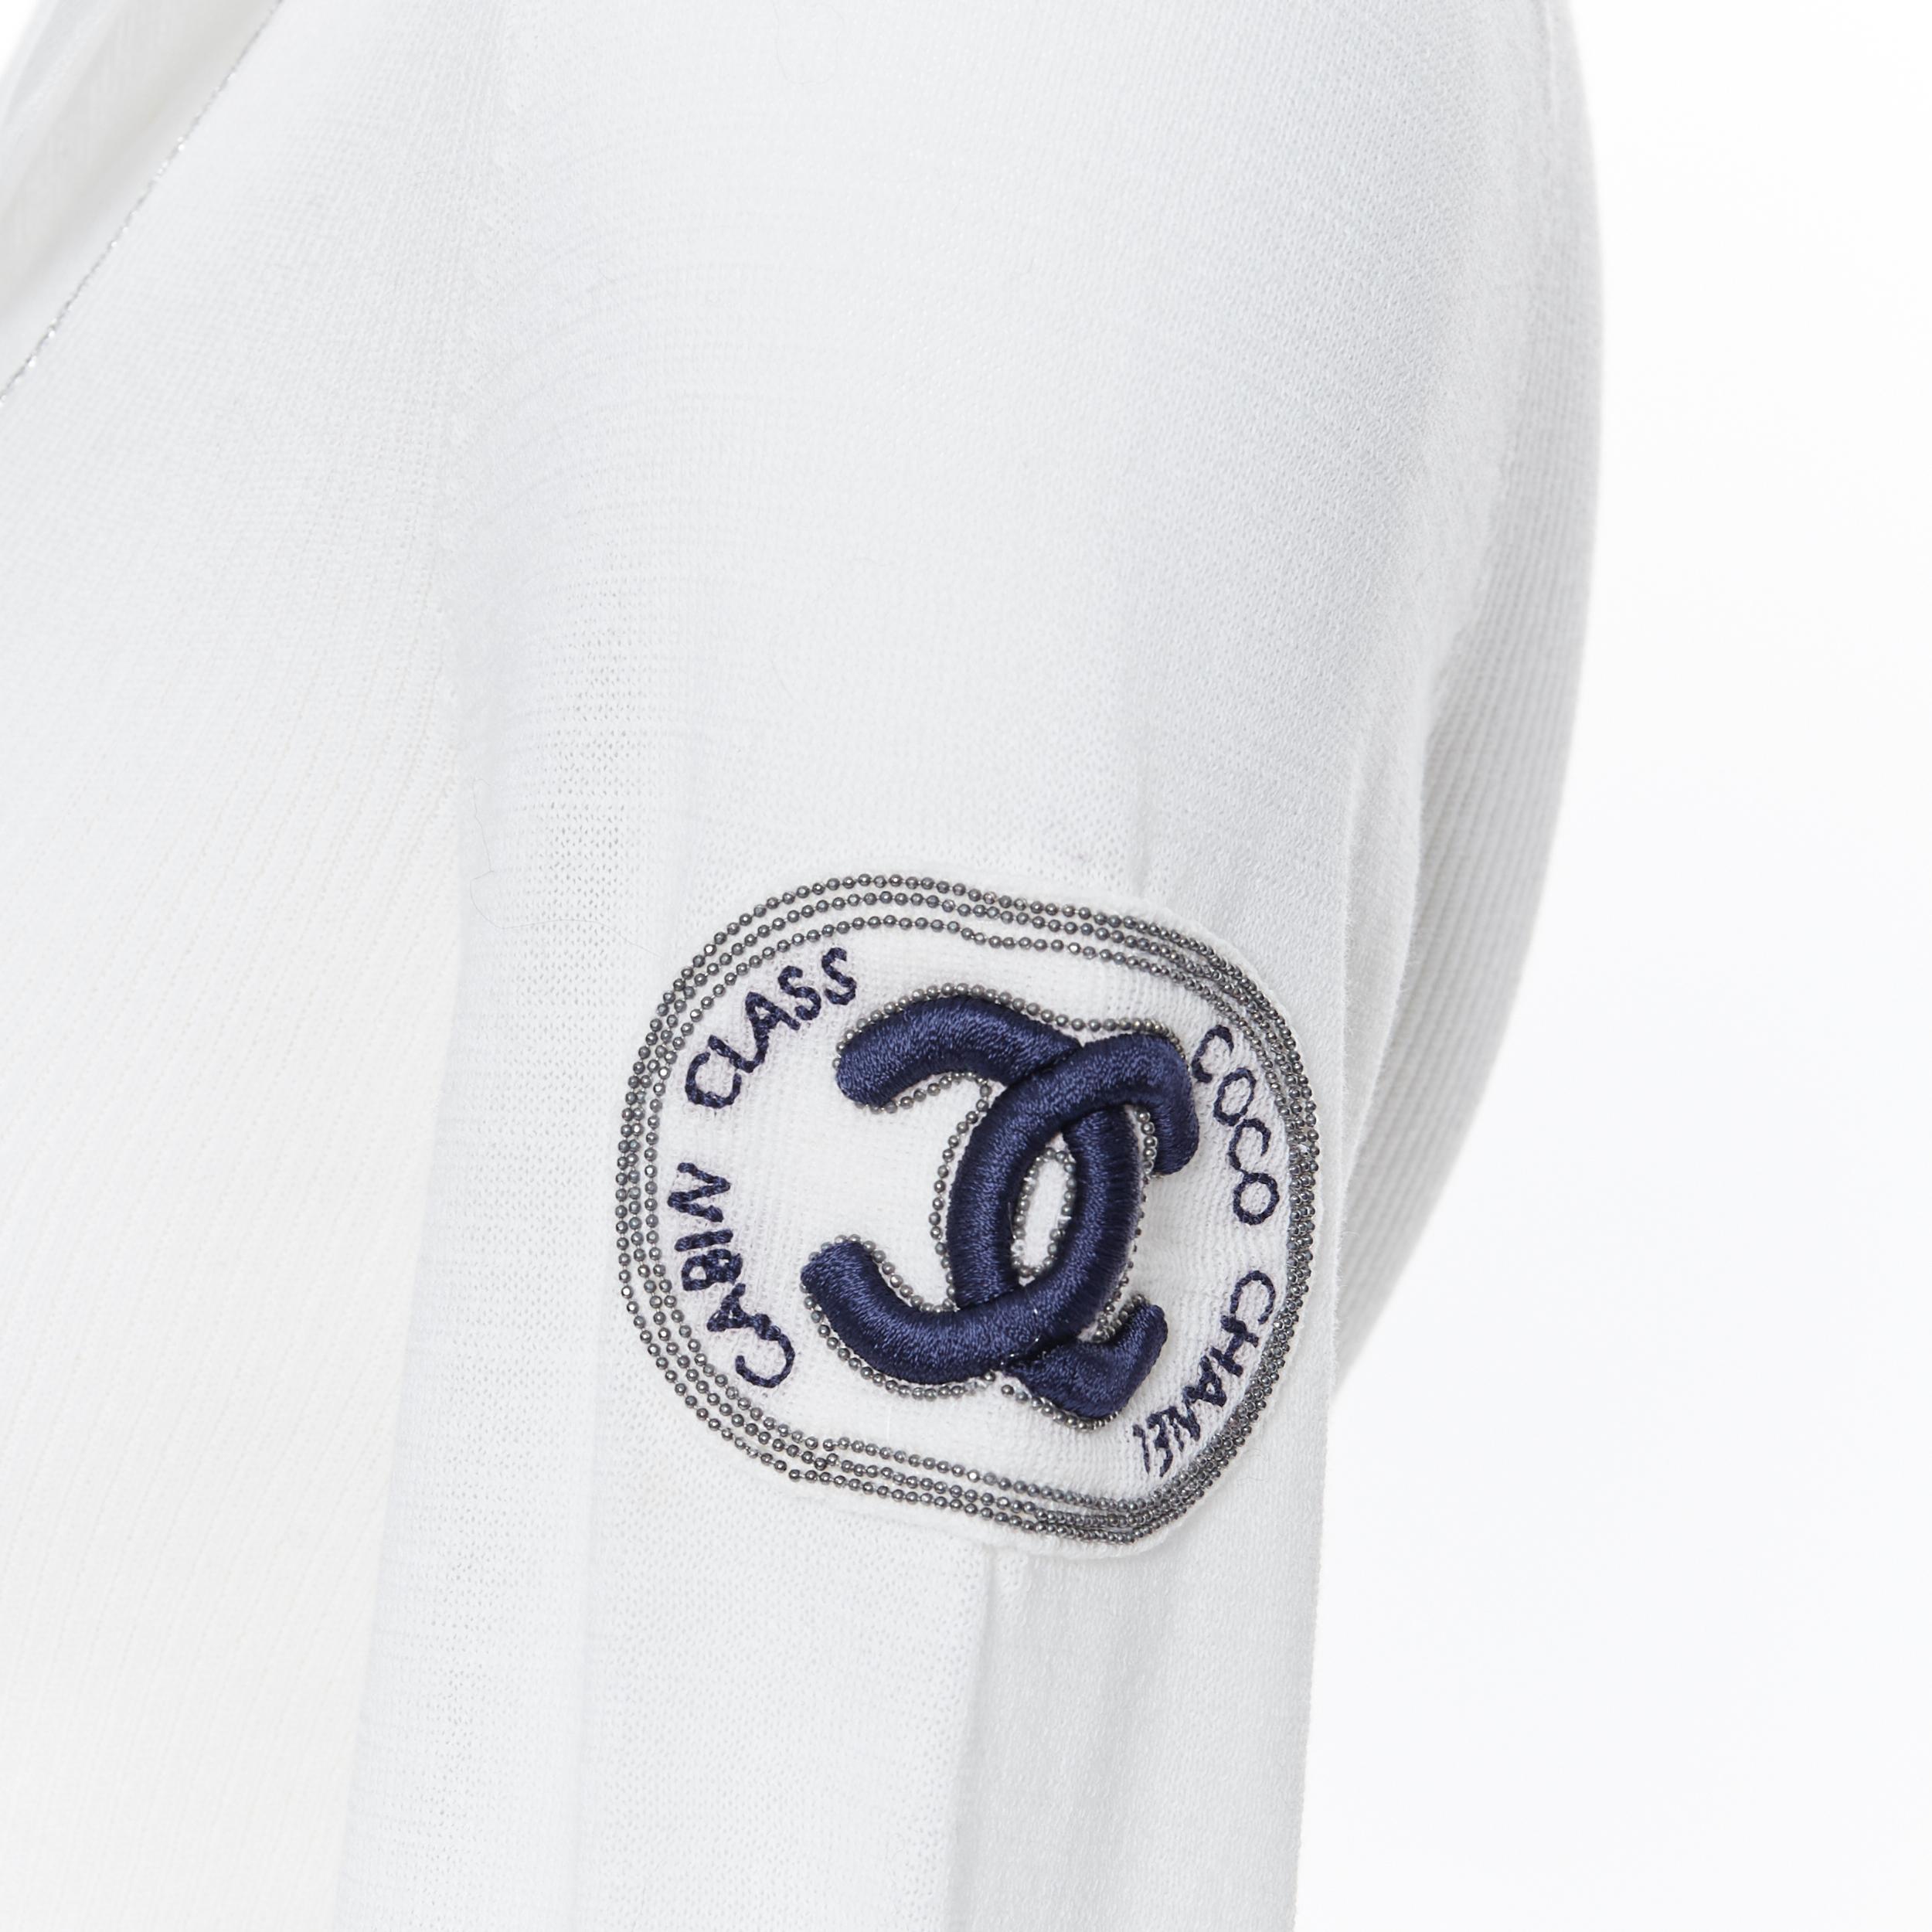 CHANEL 08C Coco Line Cabin Class CC logo embroidery ribbed polo top FR36 XS
Brand: Chanel
Designer: Karl Lagerfeld
Collection: 08C
Model Name / Style: Ribbed top
Material: Cotton, nylon
Color: White
Pattern: Solid
Extra Detail: Ribbed bodice. Lurex